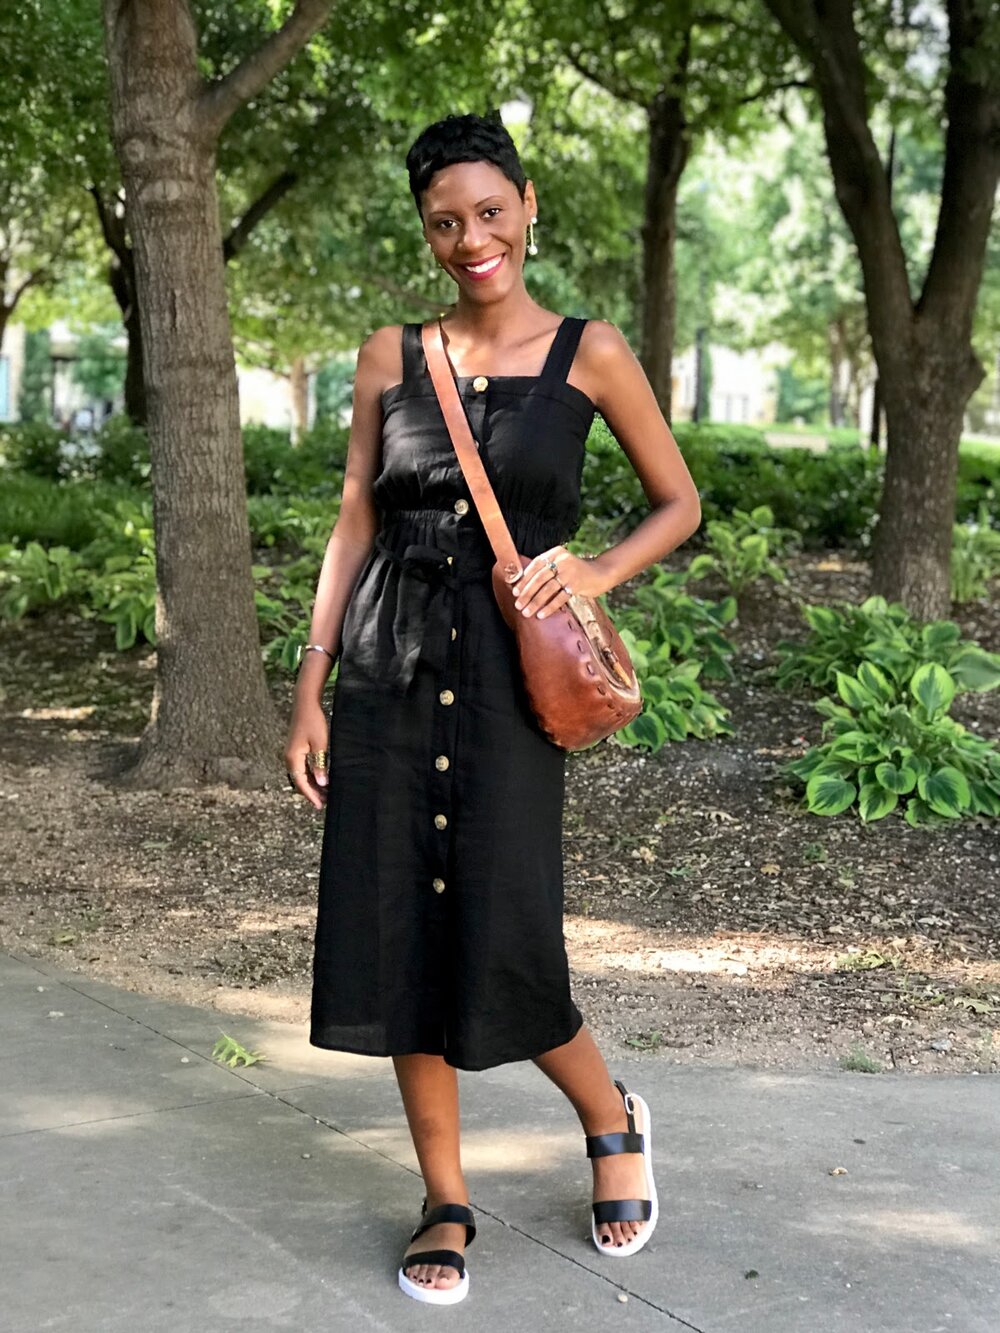 Quick OOTD: I Am SOOOOO Obsessed With This Little Black Dress + Other New Accessories!